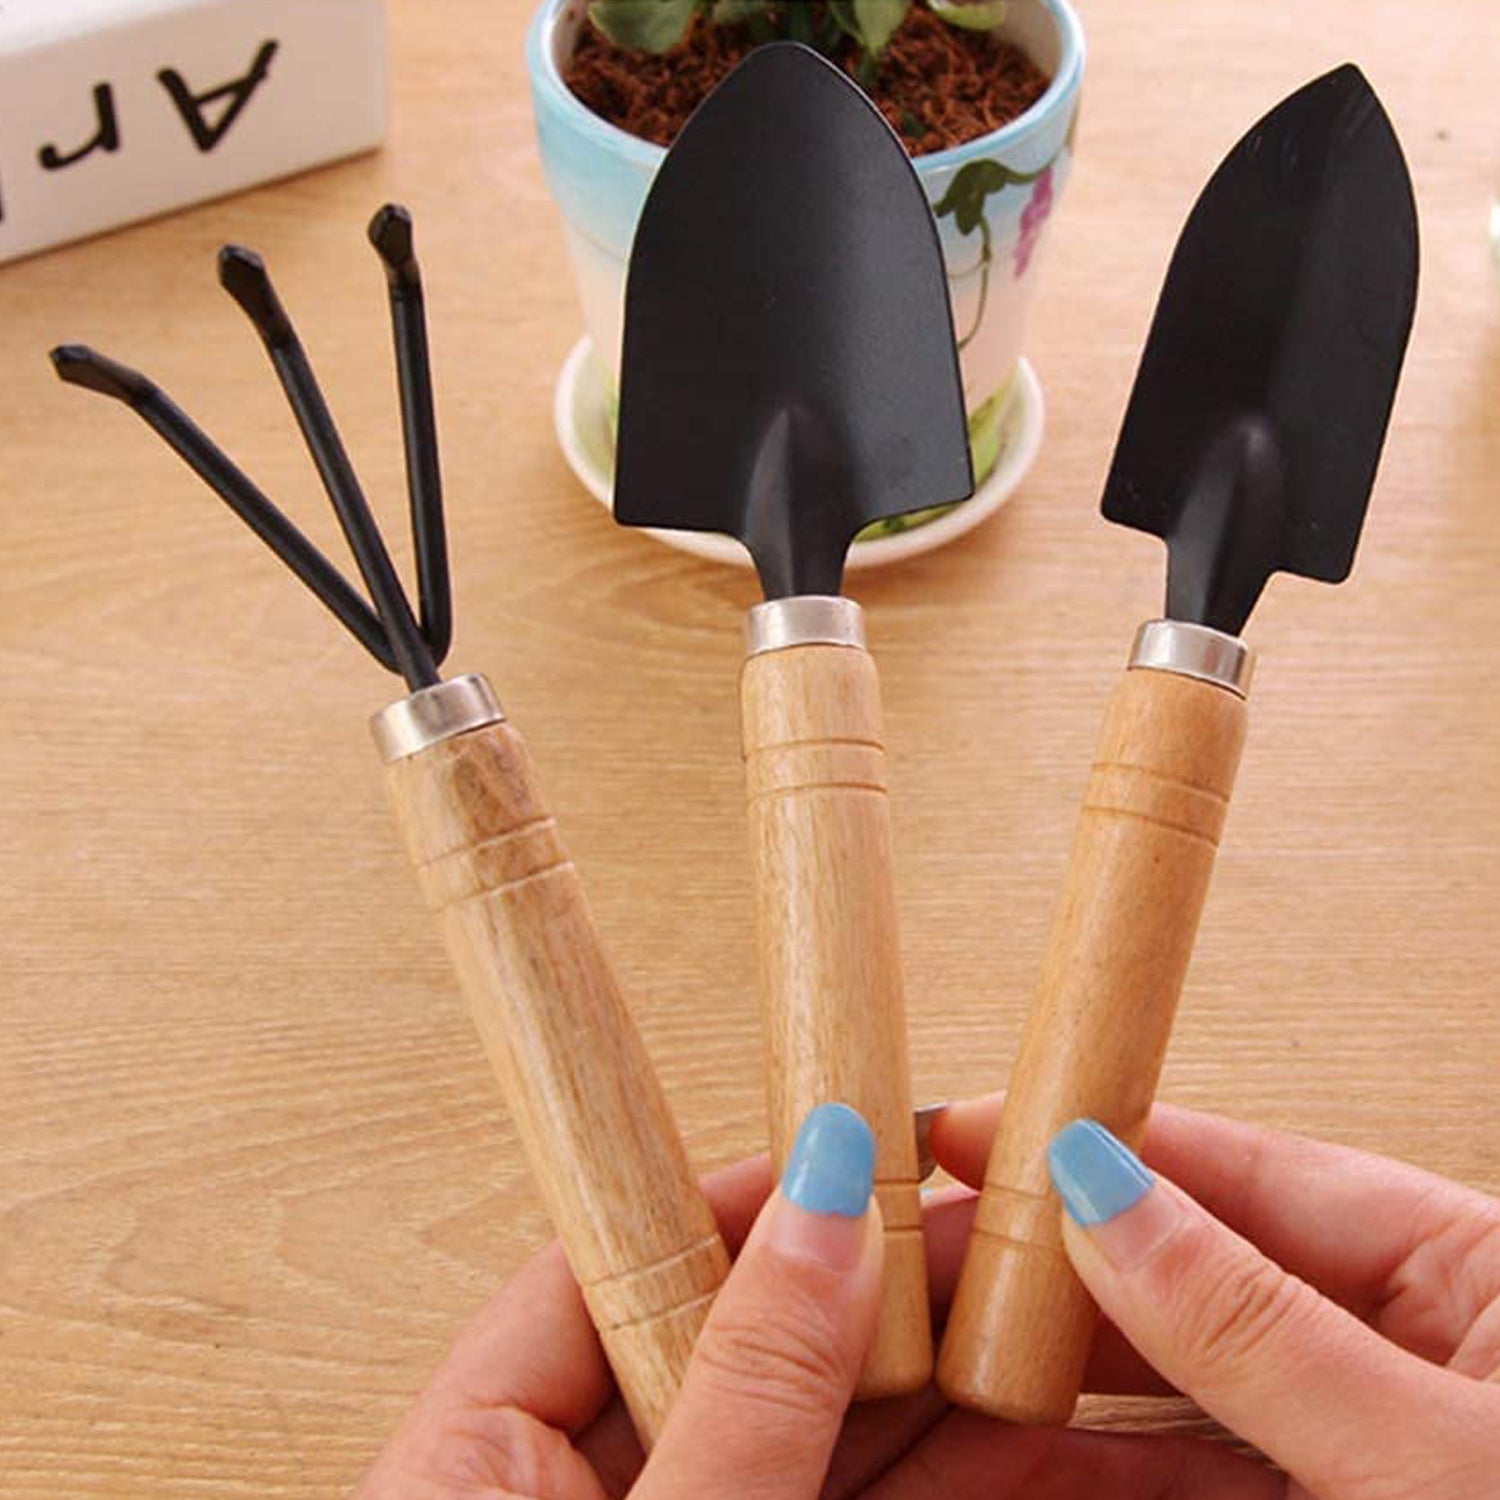 Small sized Hand Cultivator, Small Trowel, Garden Fork (Set of 3)